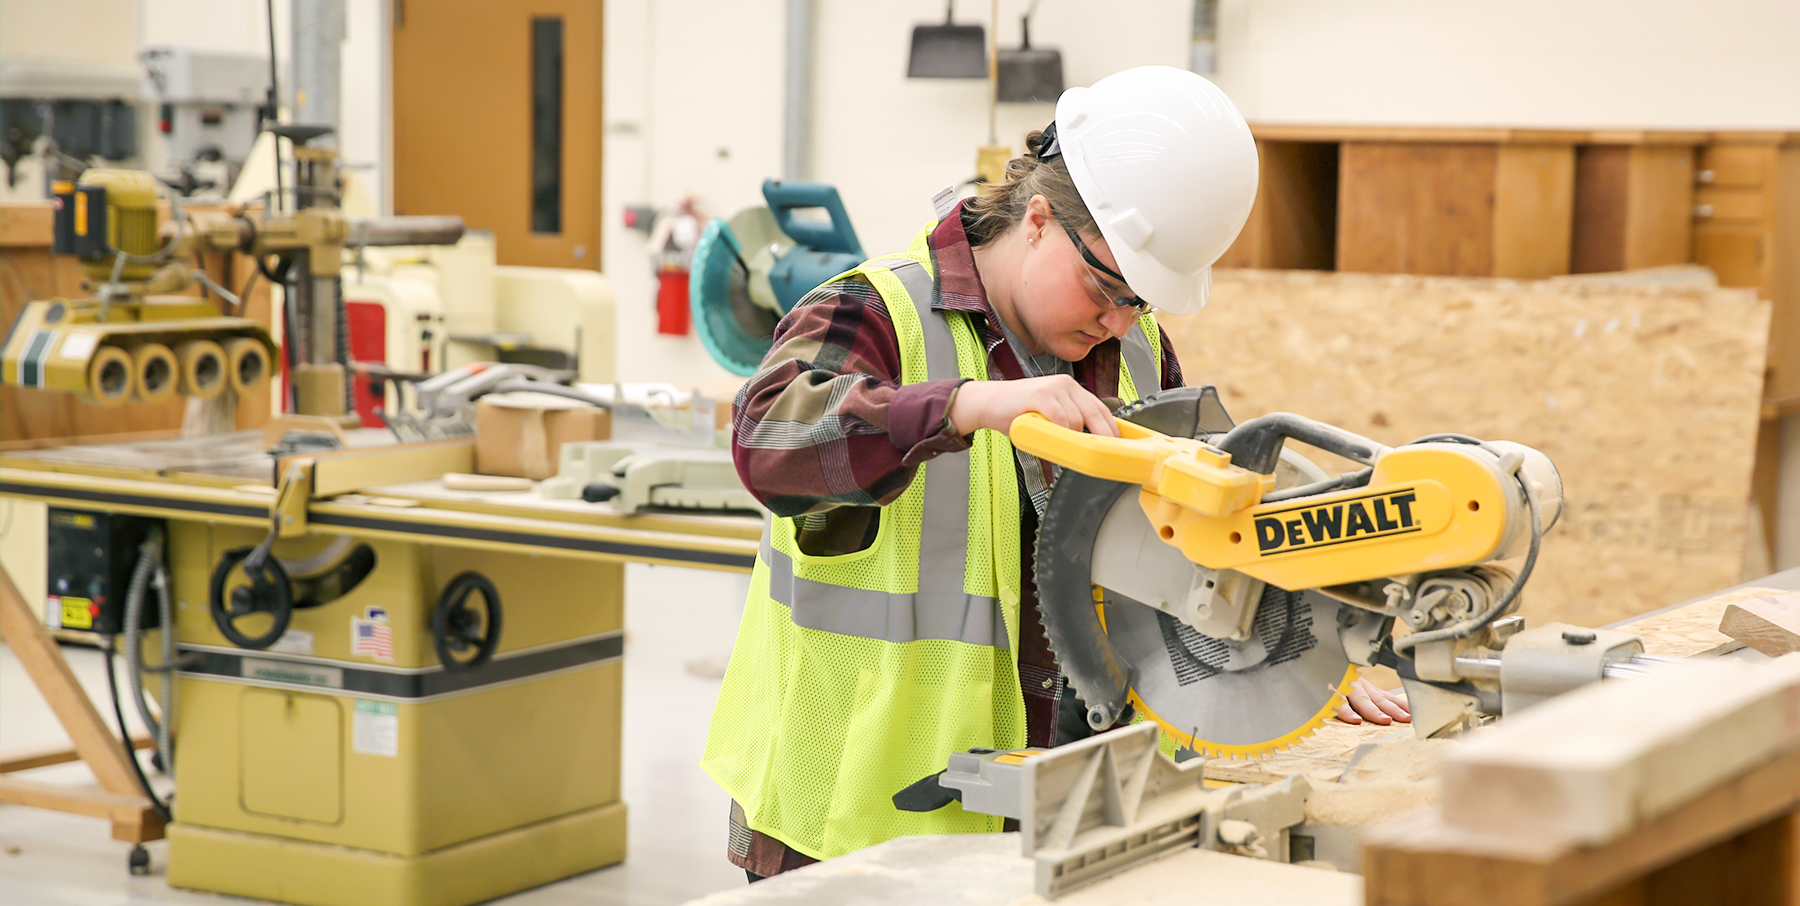 UW-Stout student uses table saw in the construction lab